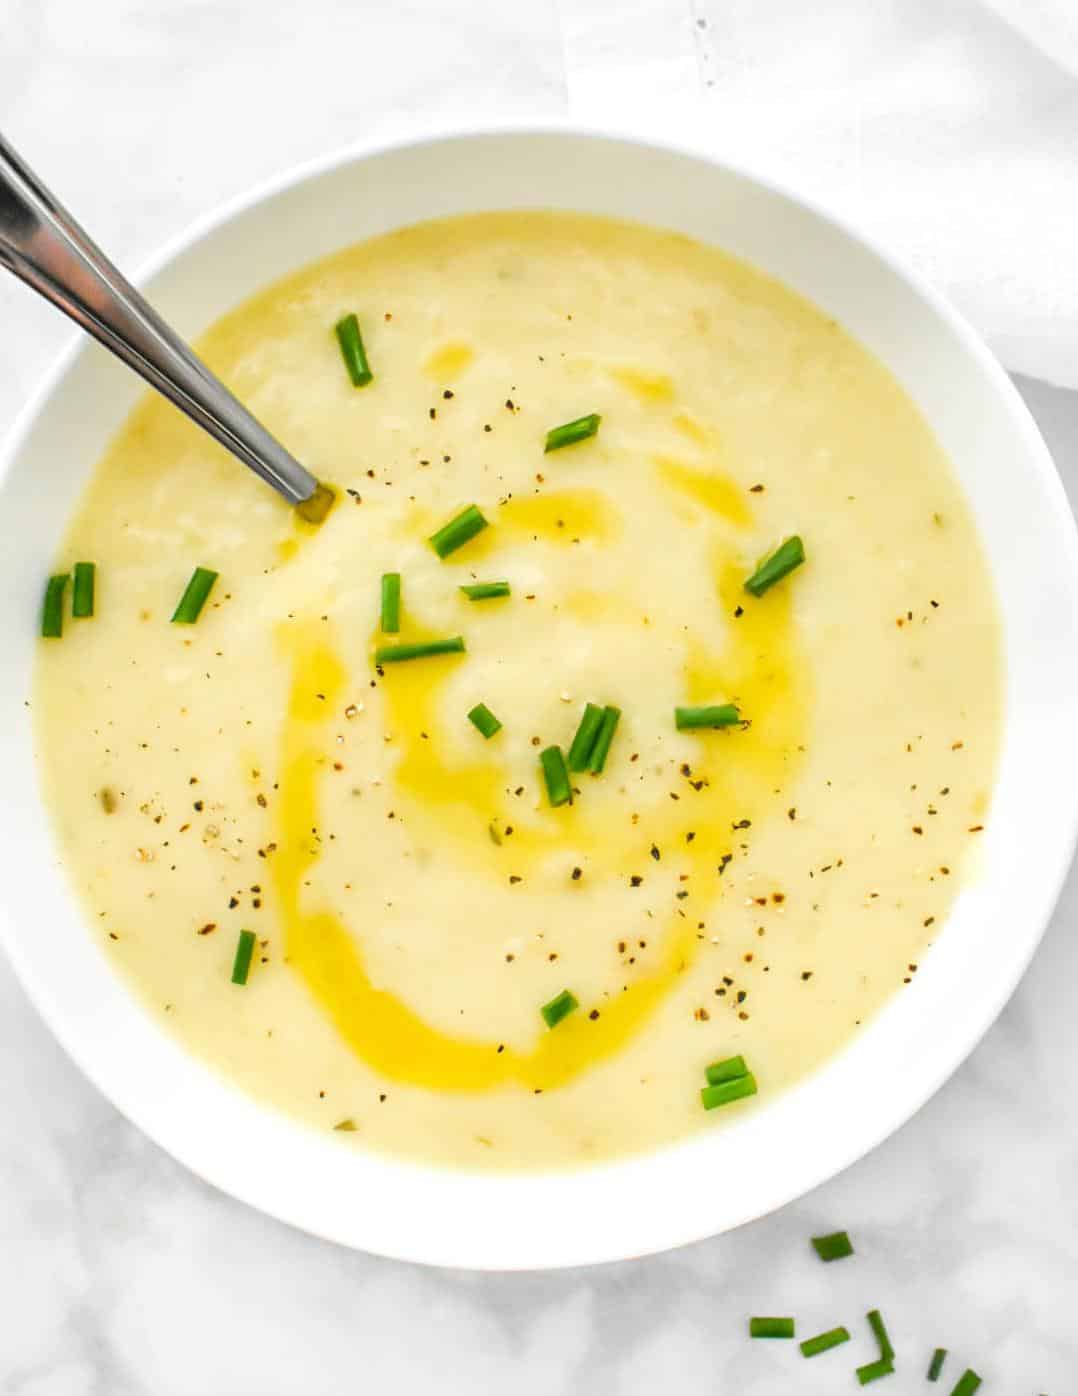  With its creamy texture and savory flavor, this soup is sure to hit the spot.